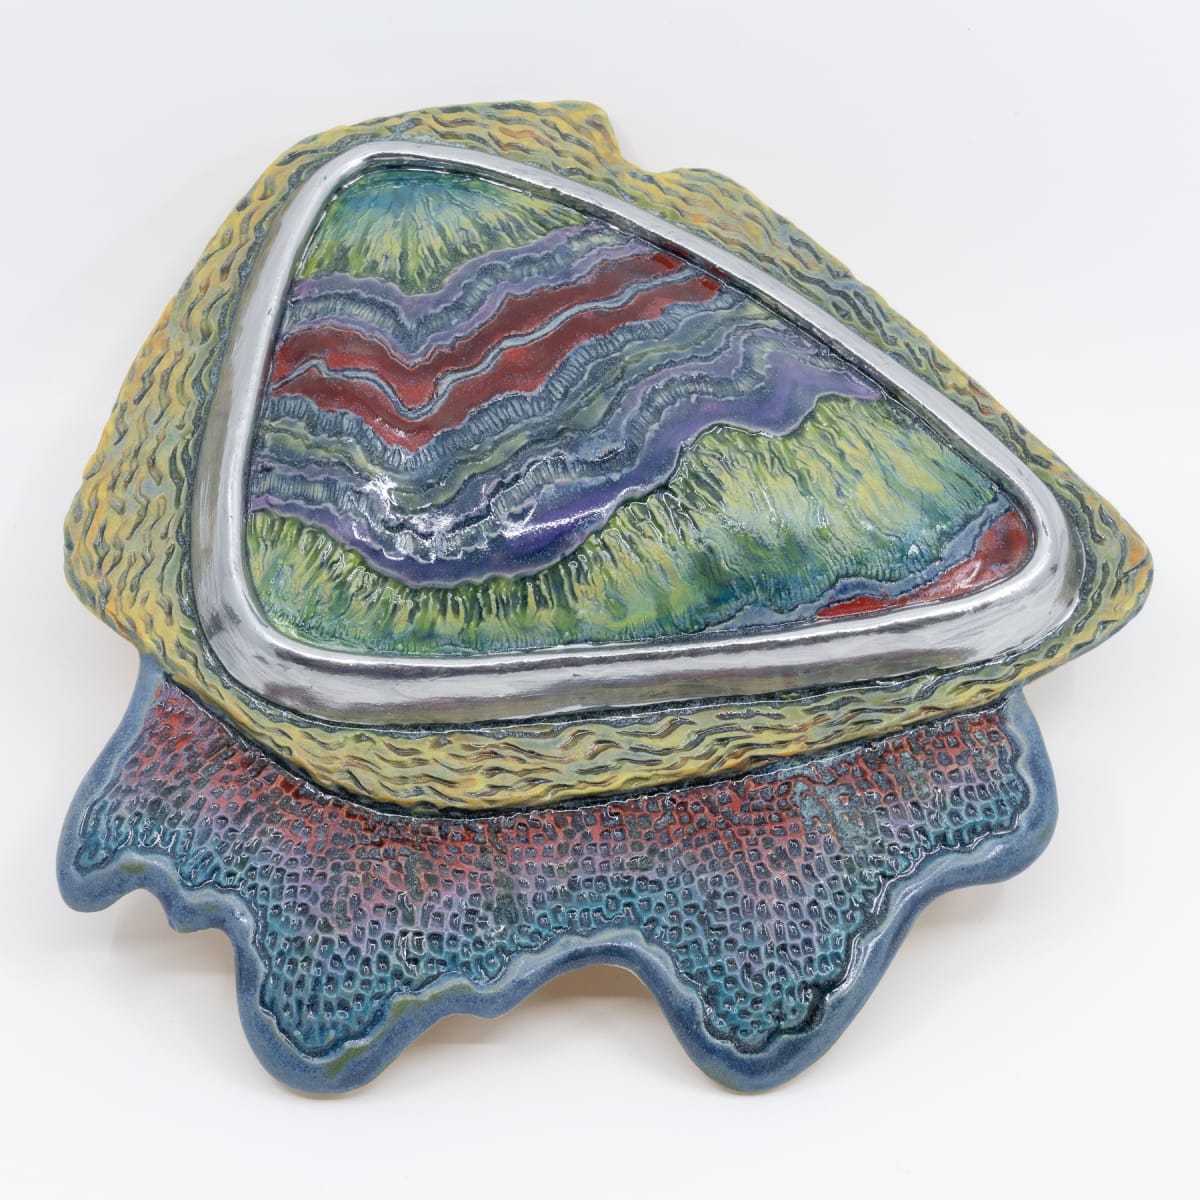 Blue Stone Jewel - Wall Art by Sandy Miller  Image: Top view